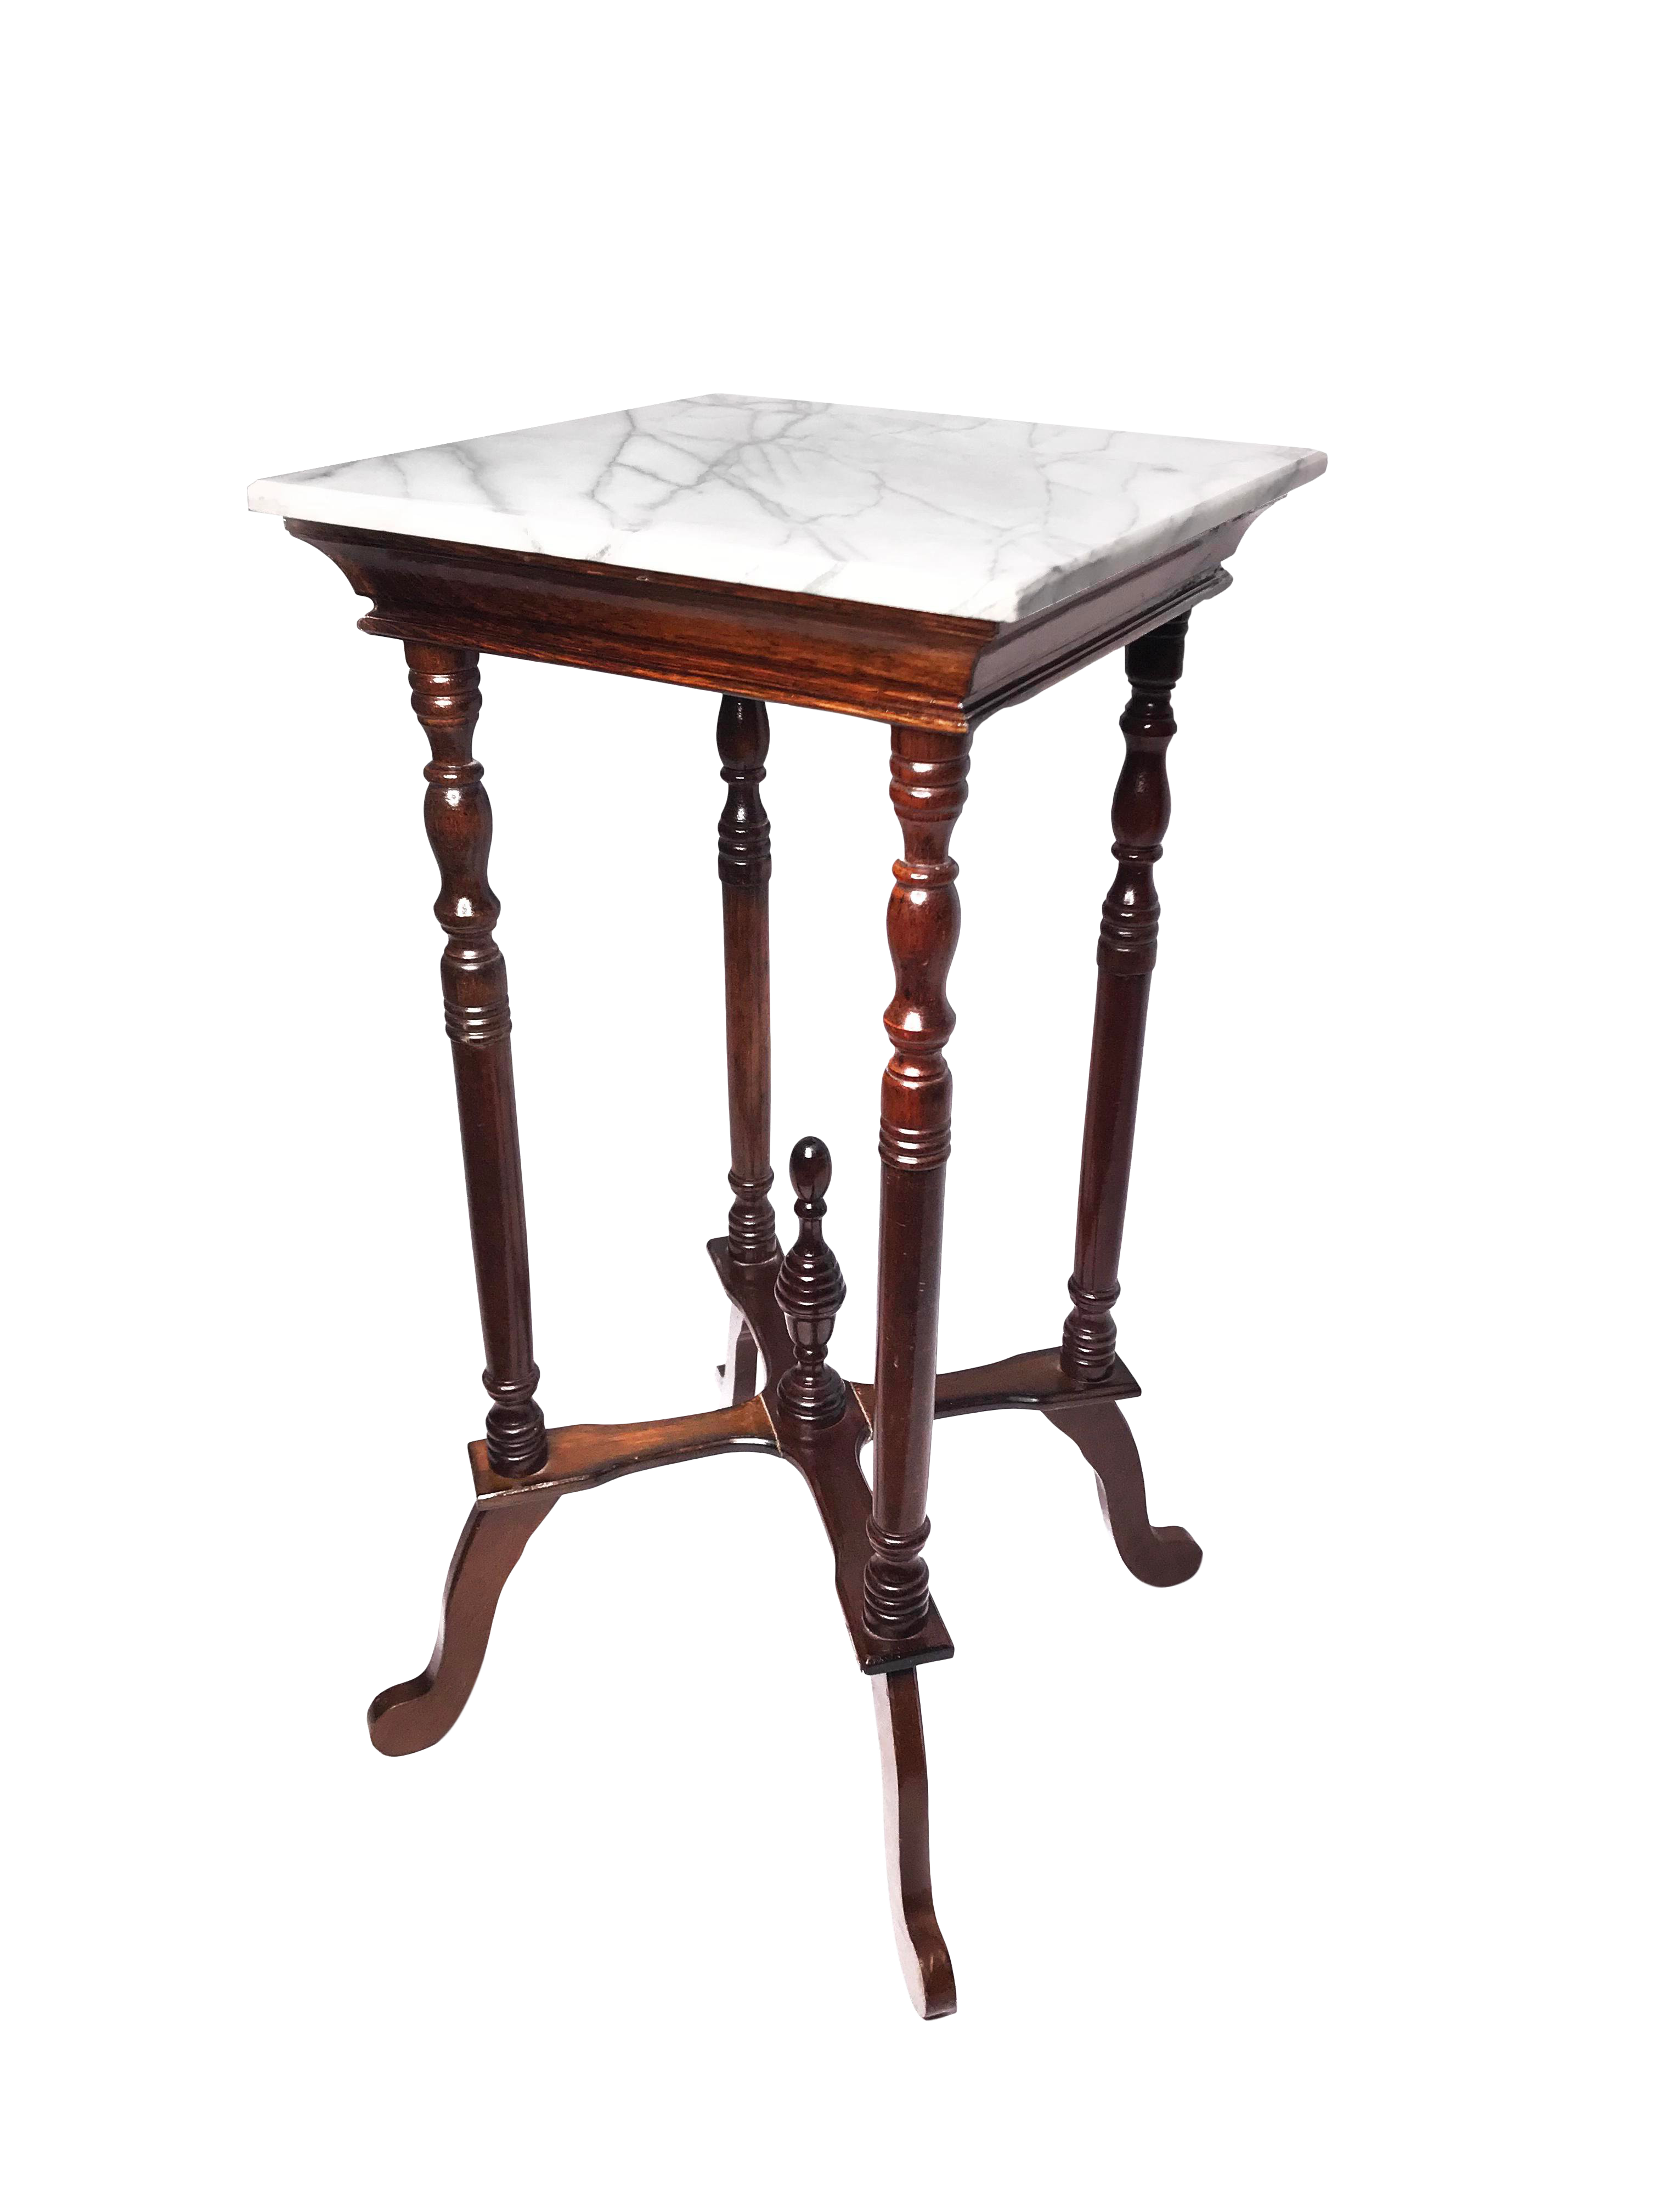 victorian elegant tall marble top wooden accent table chairish round side clear coffee acrylic outdoor setting covers espresso cocktail small bathroom tables glass and end lamp